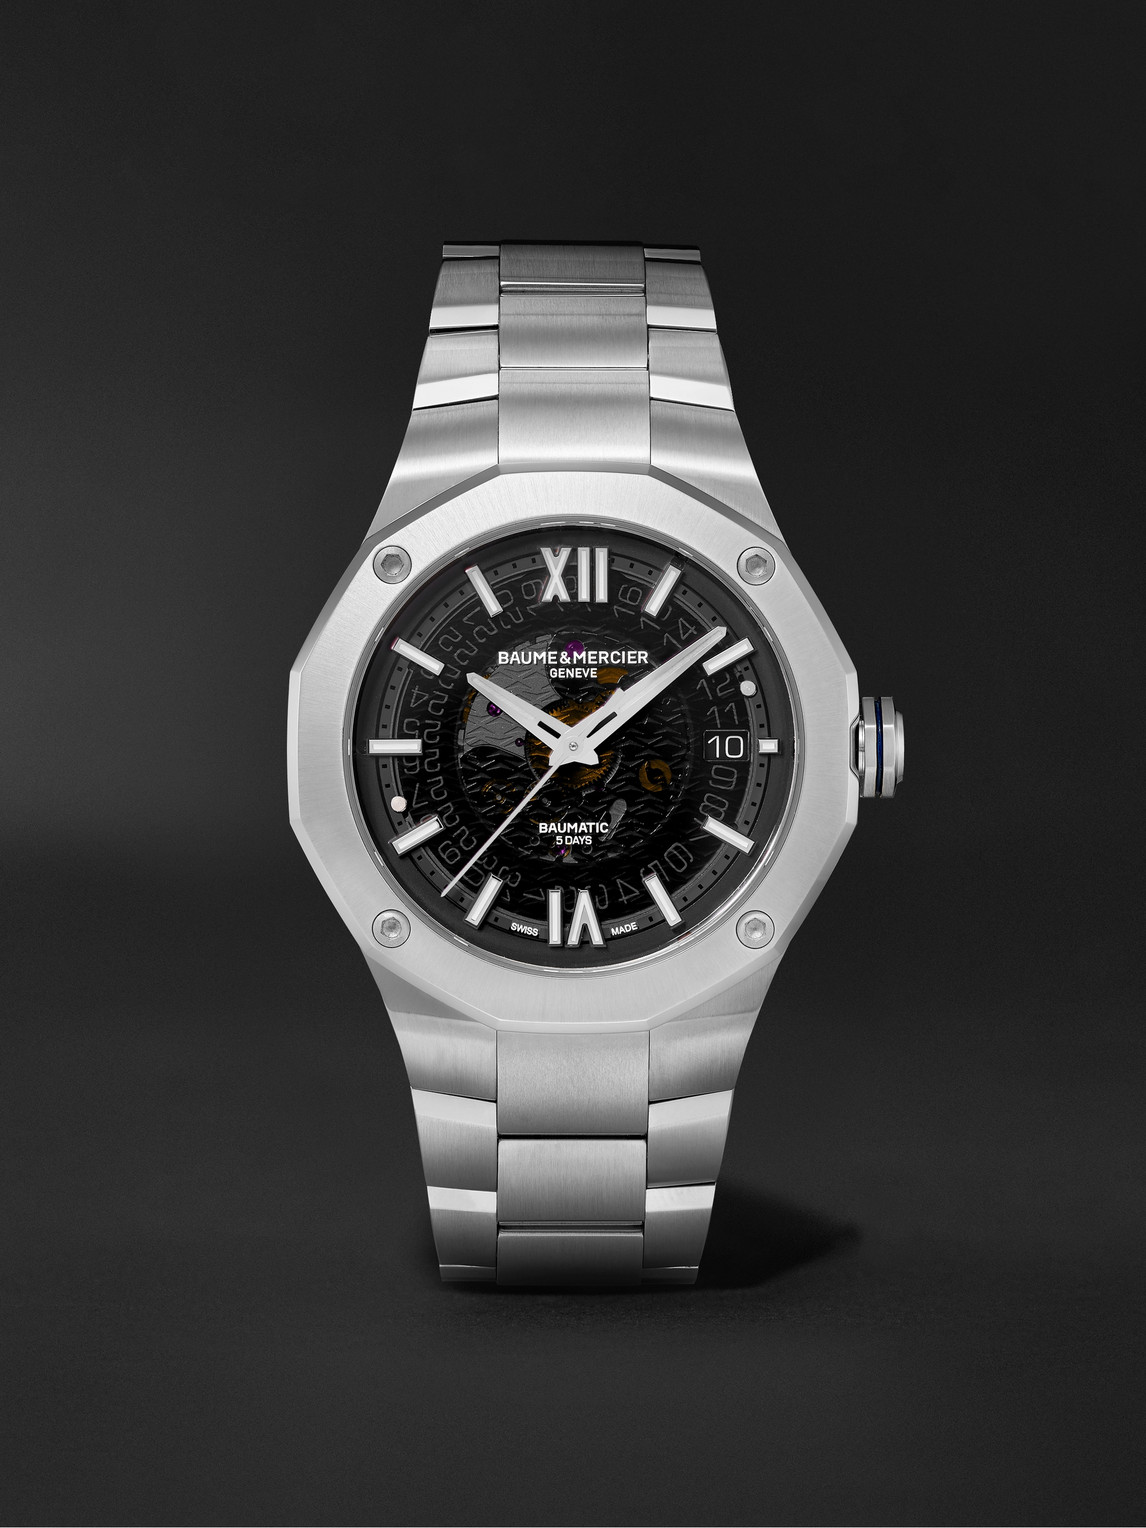 Baume & Mercier Riviera Automatic 42mm Stainless Steel Watch, Ref. No. M0a10702 In Black